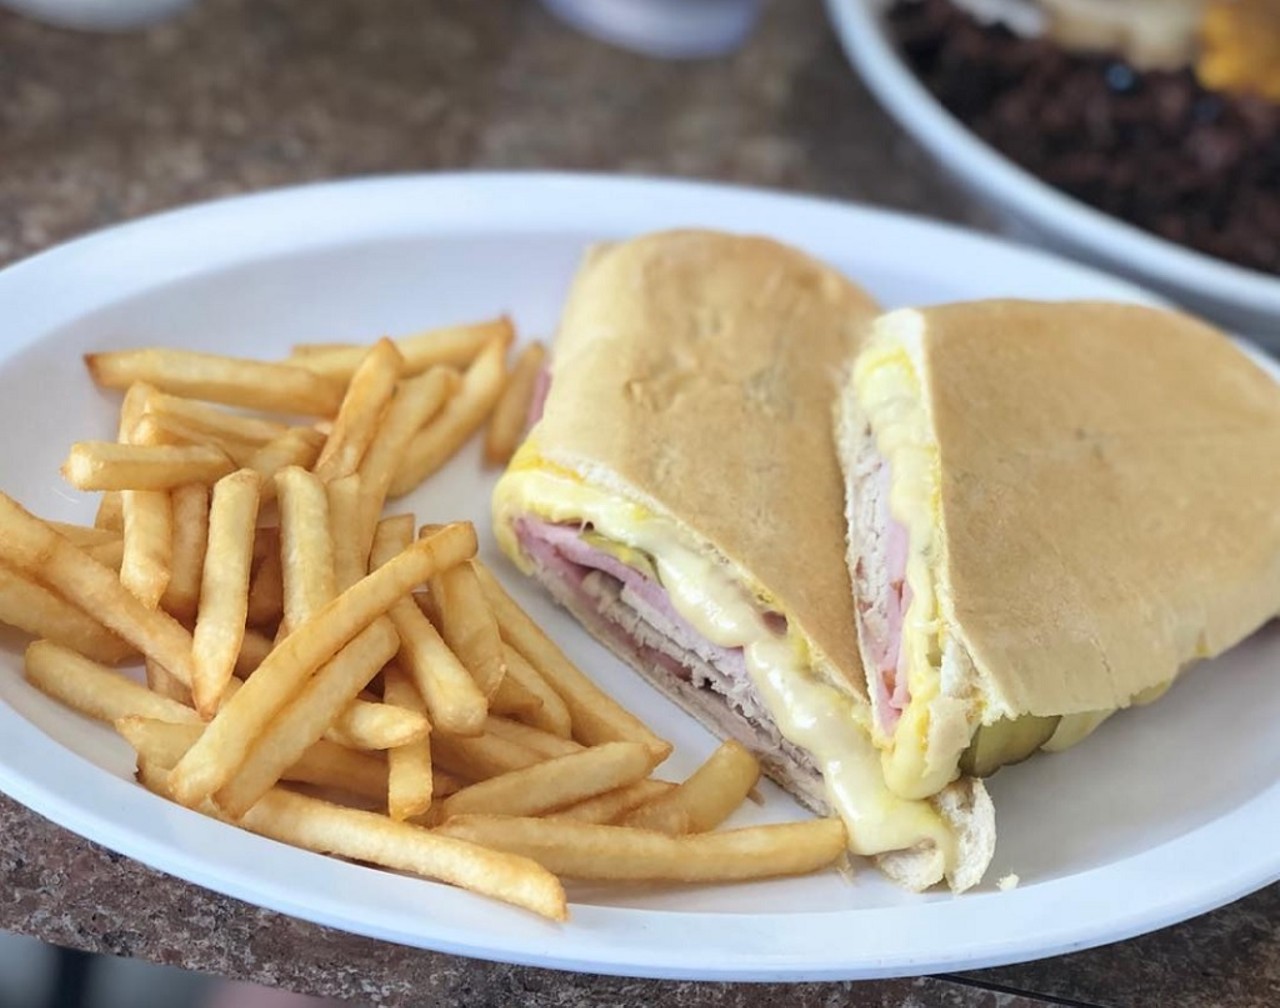 Rey&#146;s Cuban Cafe 
7800 S. US Highway 17-92, Casselberry 
Rey&#146;s offers a large variety of meals steeped in Cuban tradition and flavors and their sandwich is a standout.
Photo via Rey&#146;s Cuban Cafe/Instagram